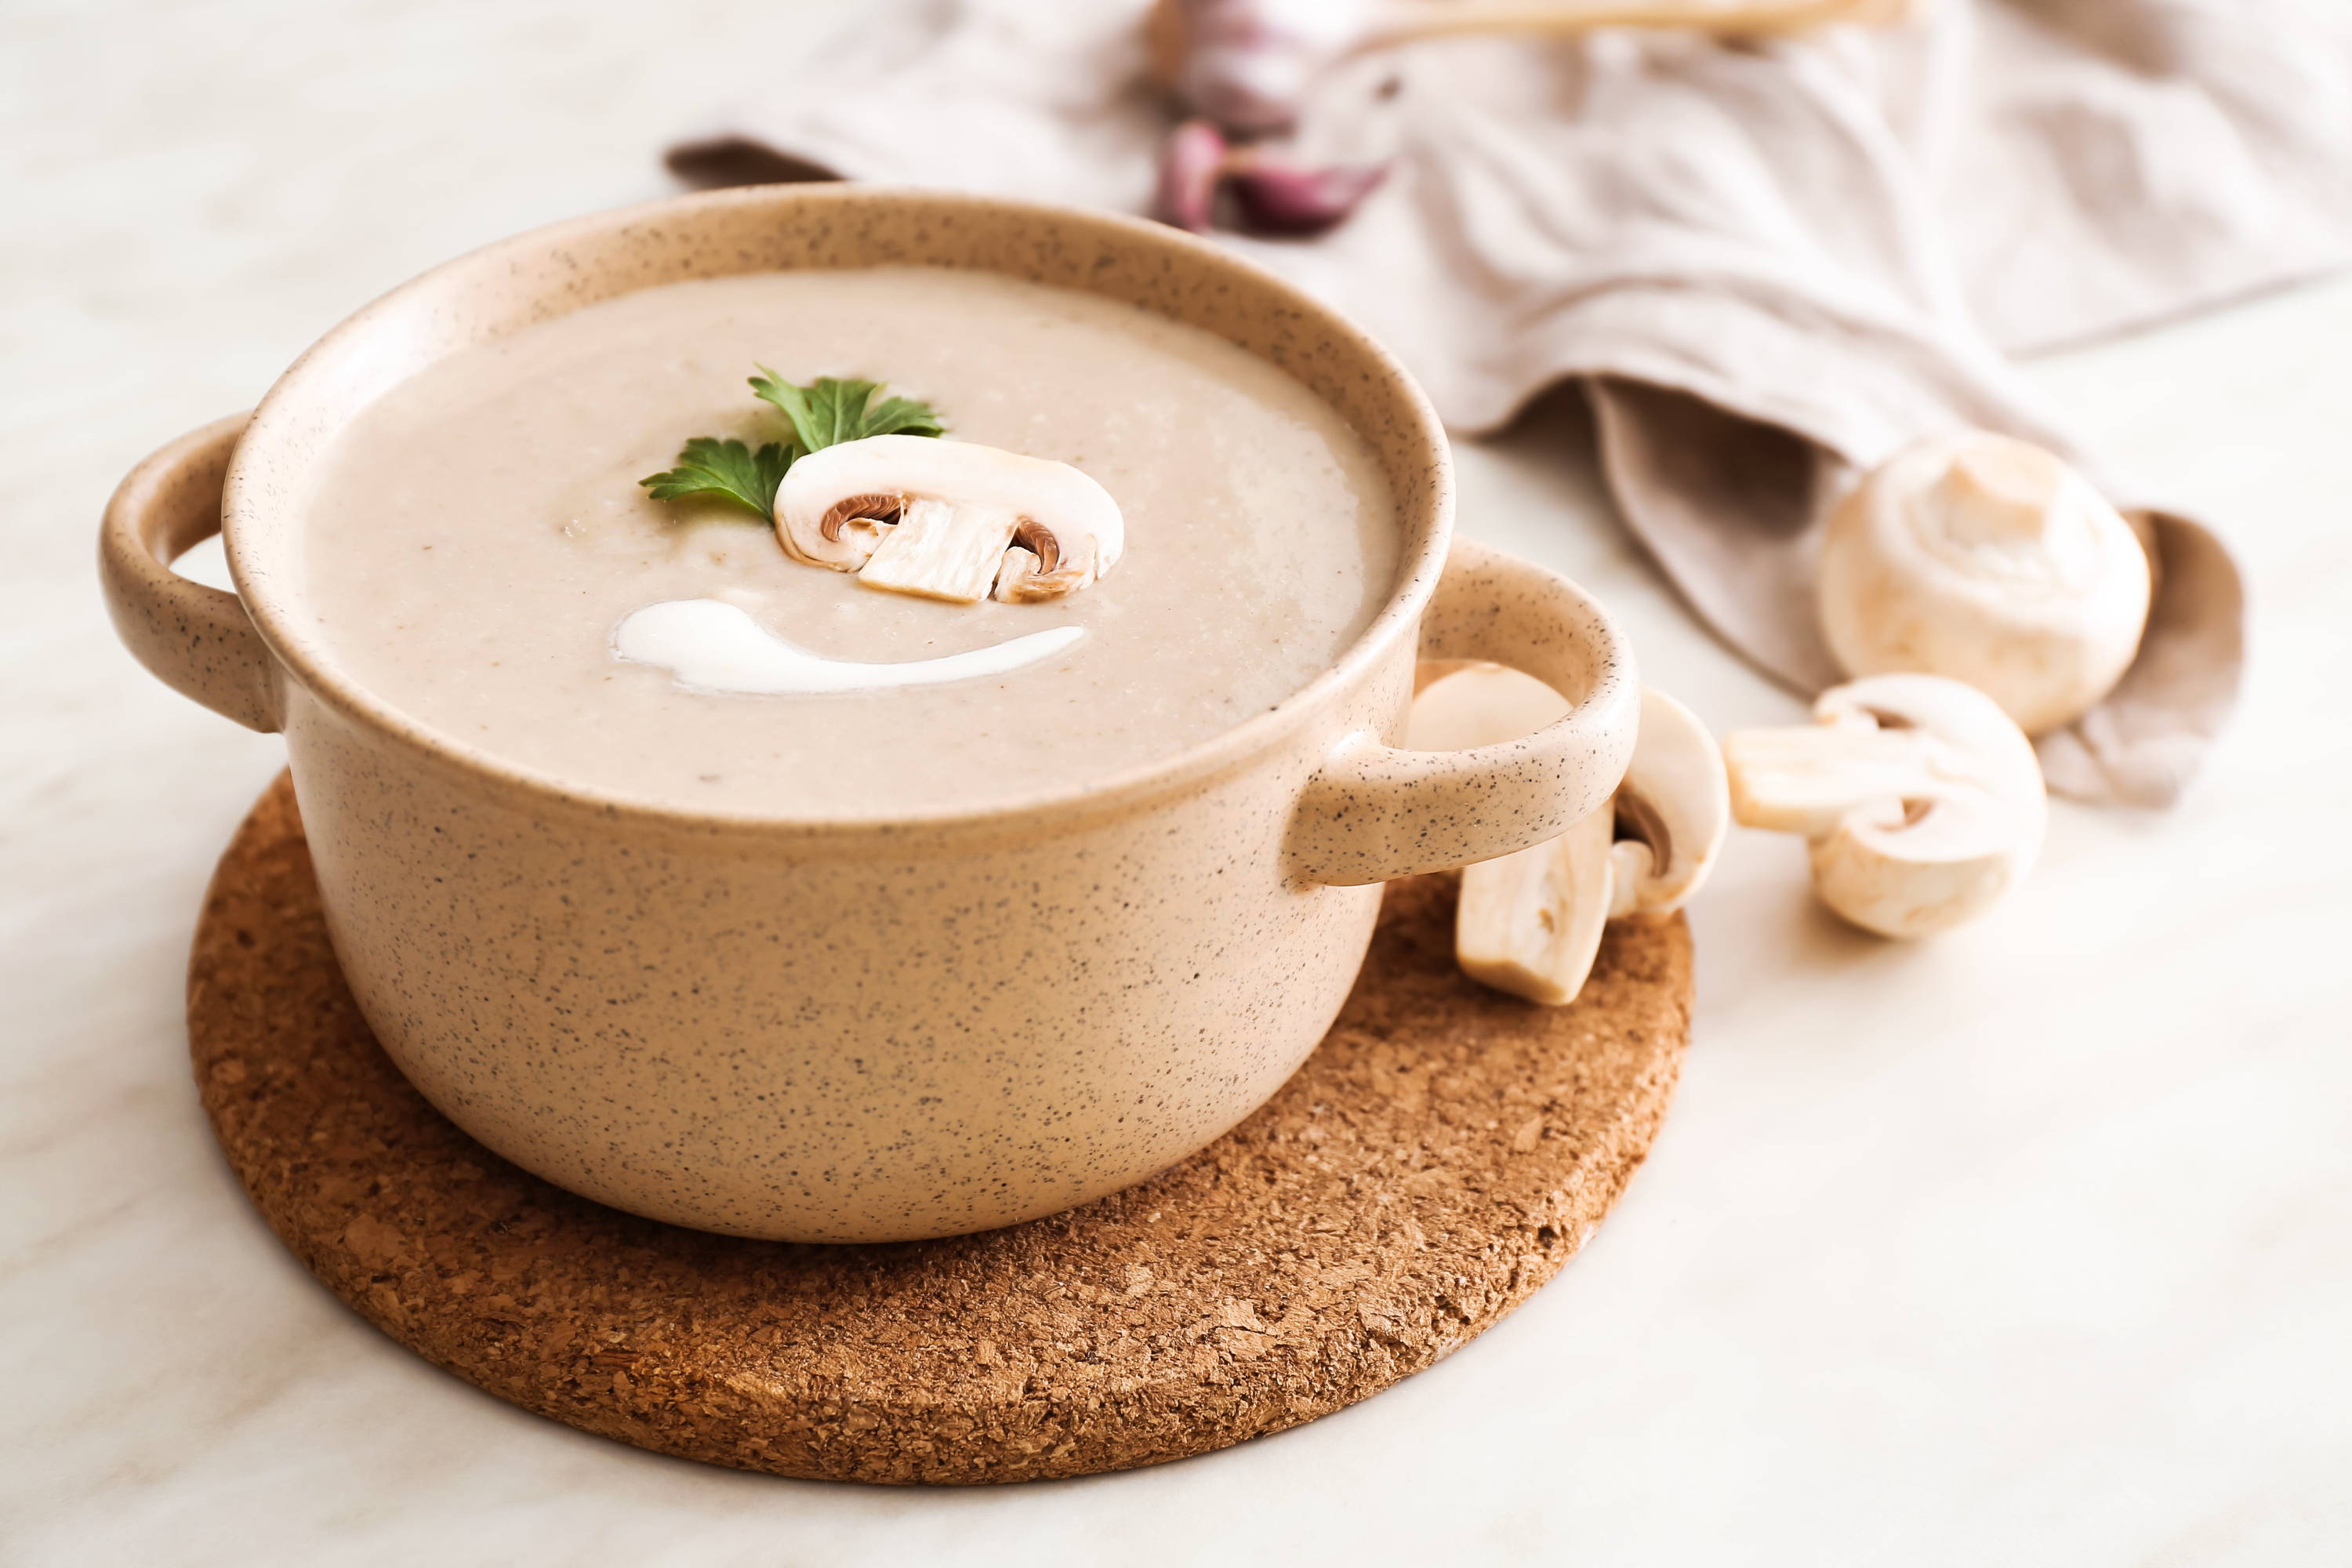 creamy mushroom soup on a wooden background  with mushrooms